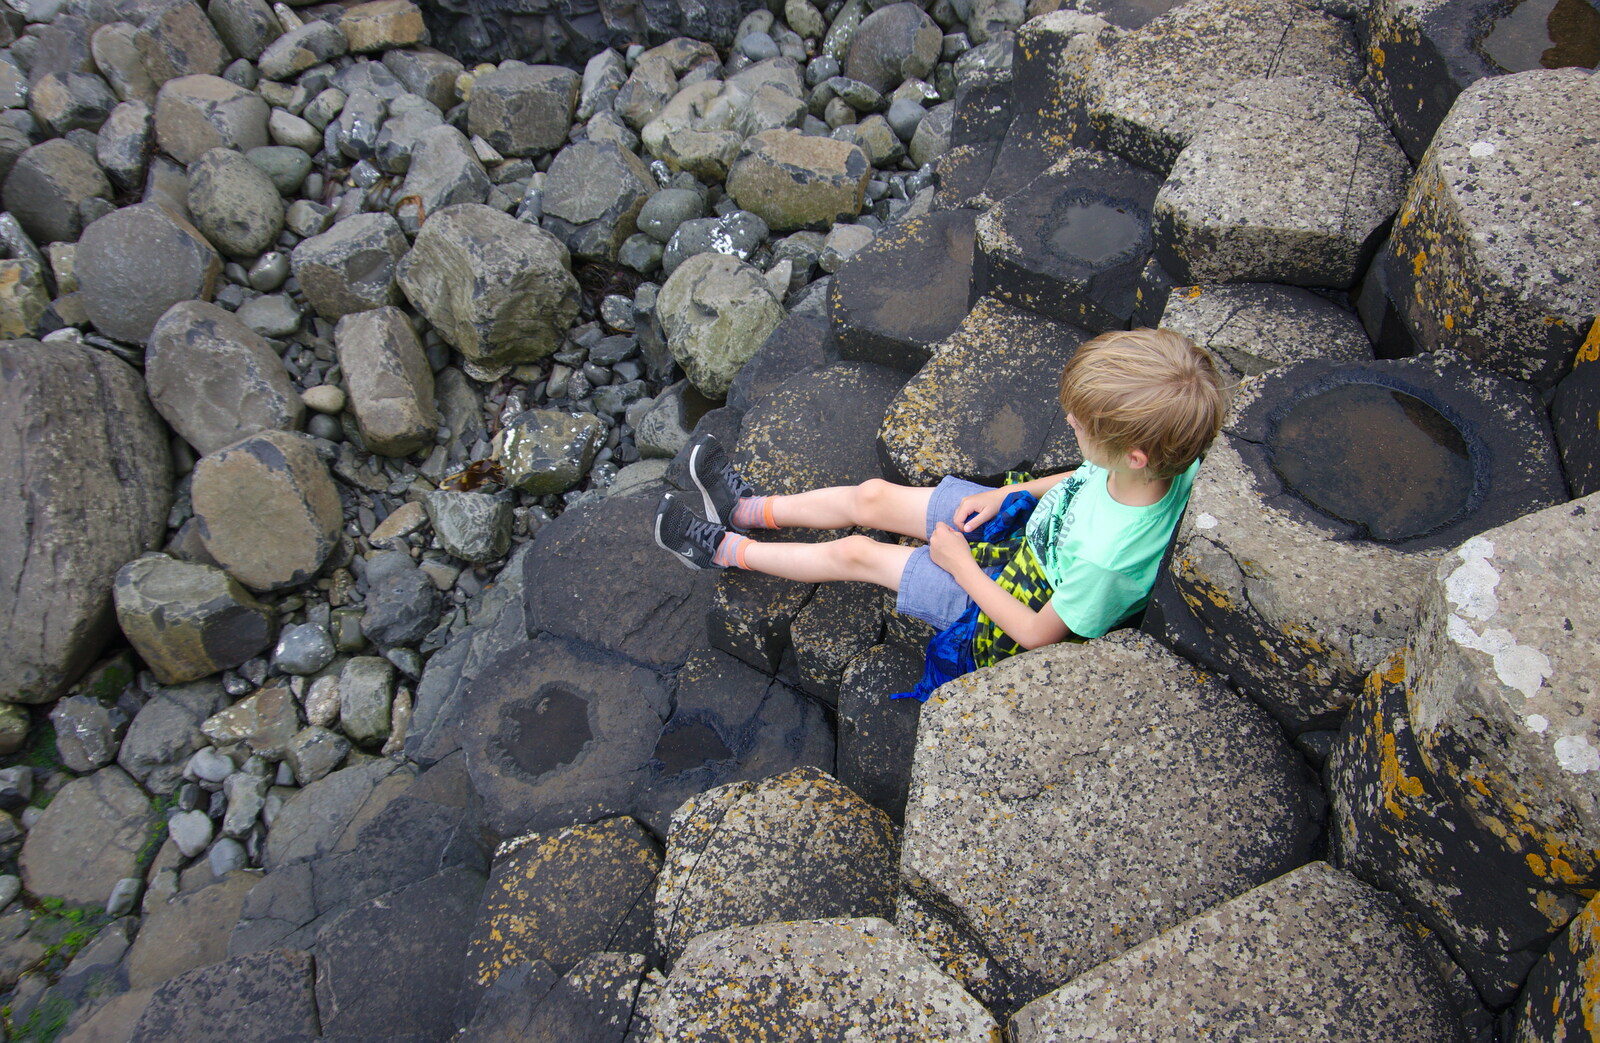 Harry sits down for a bit from The Giant's Causeway, Bushmills, County Antrim, Northern Ireland - 14th August 2019